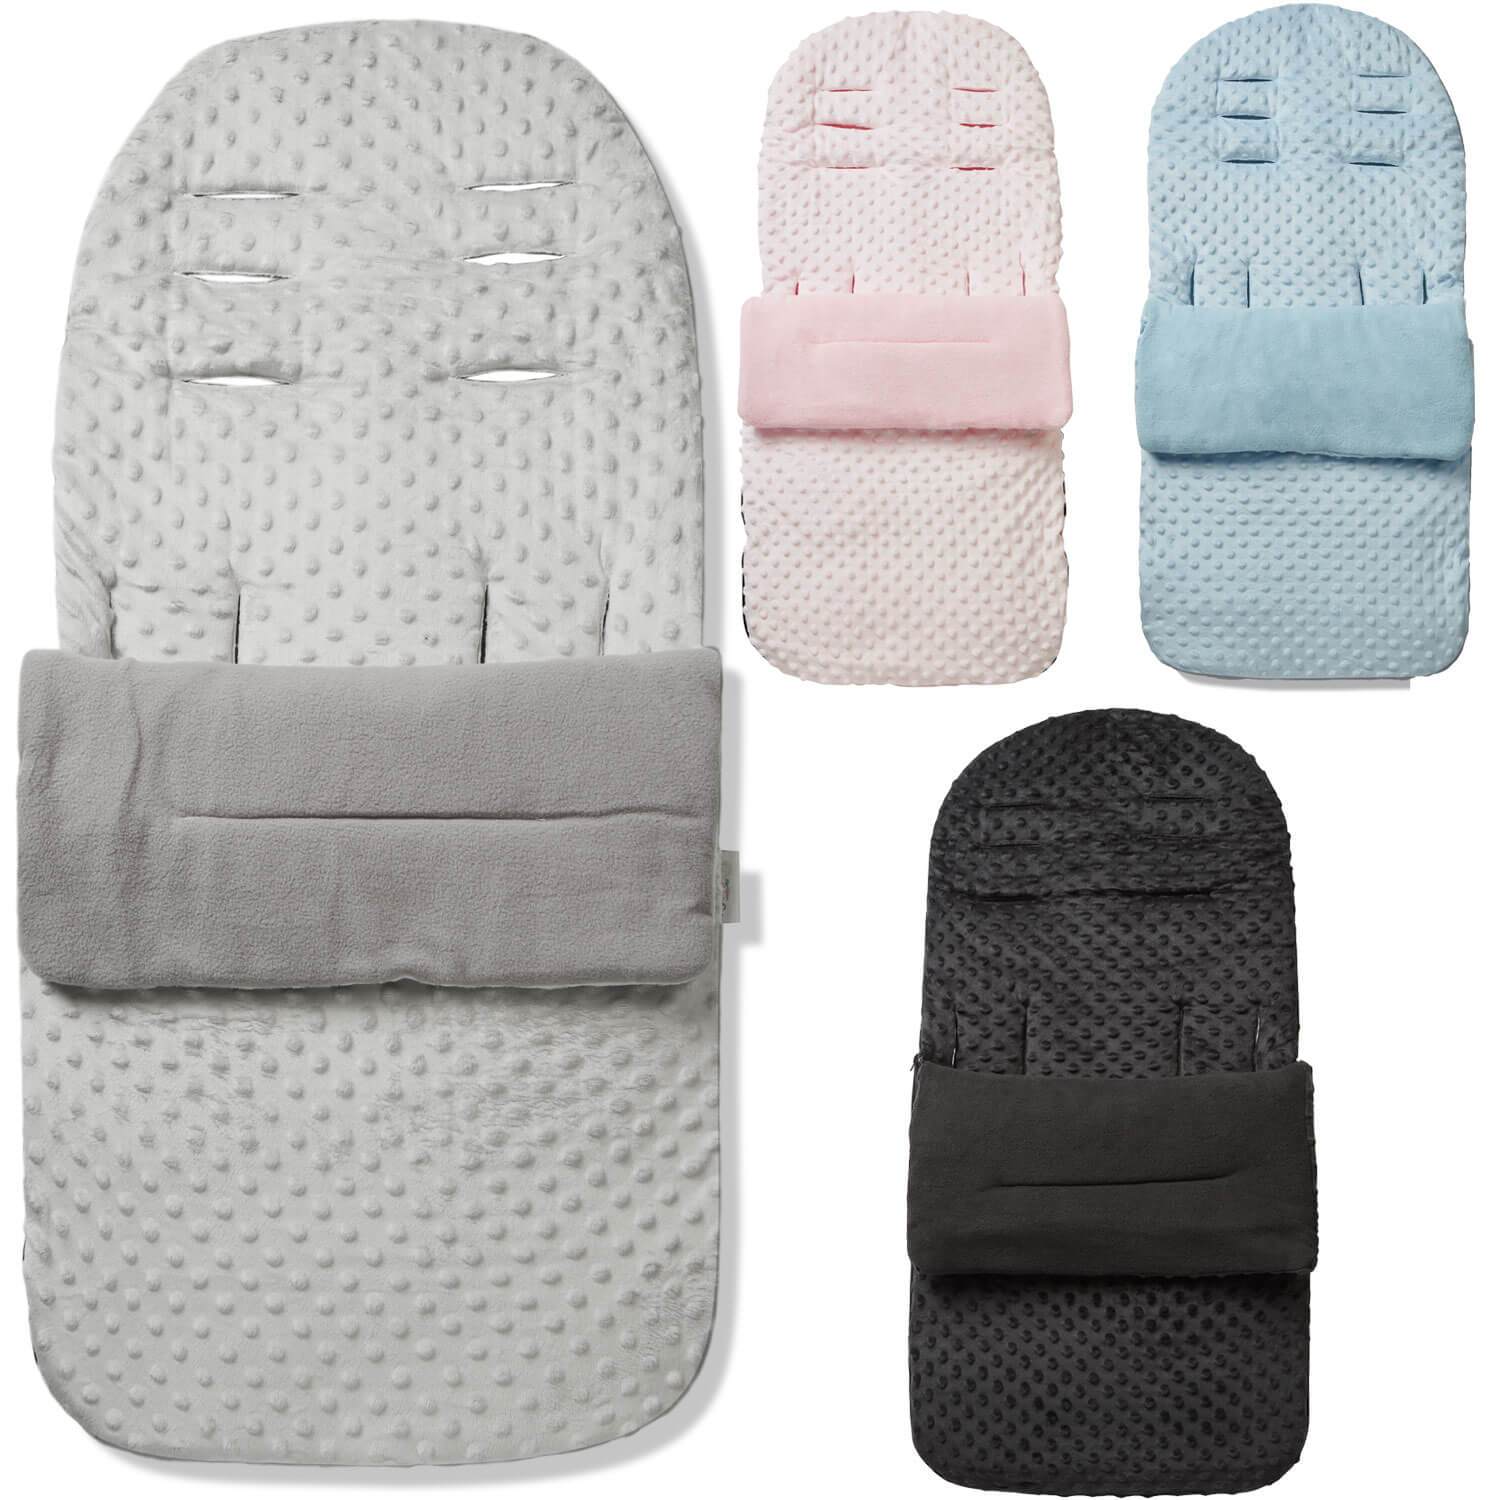 Dimple Footmuff / Cosy Toes Compatible with Babyzen - For Your Little One